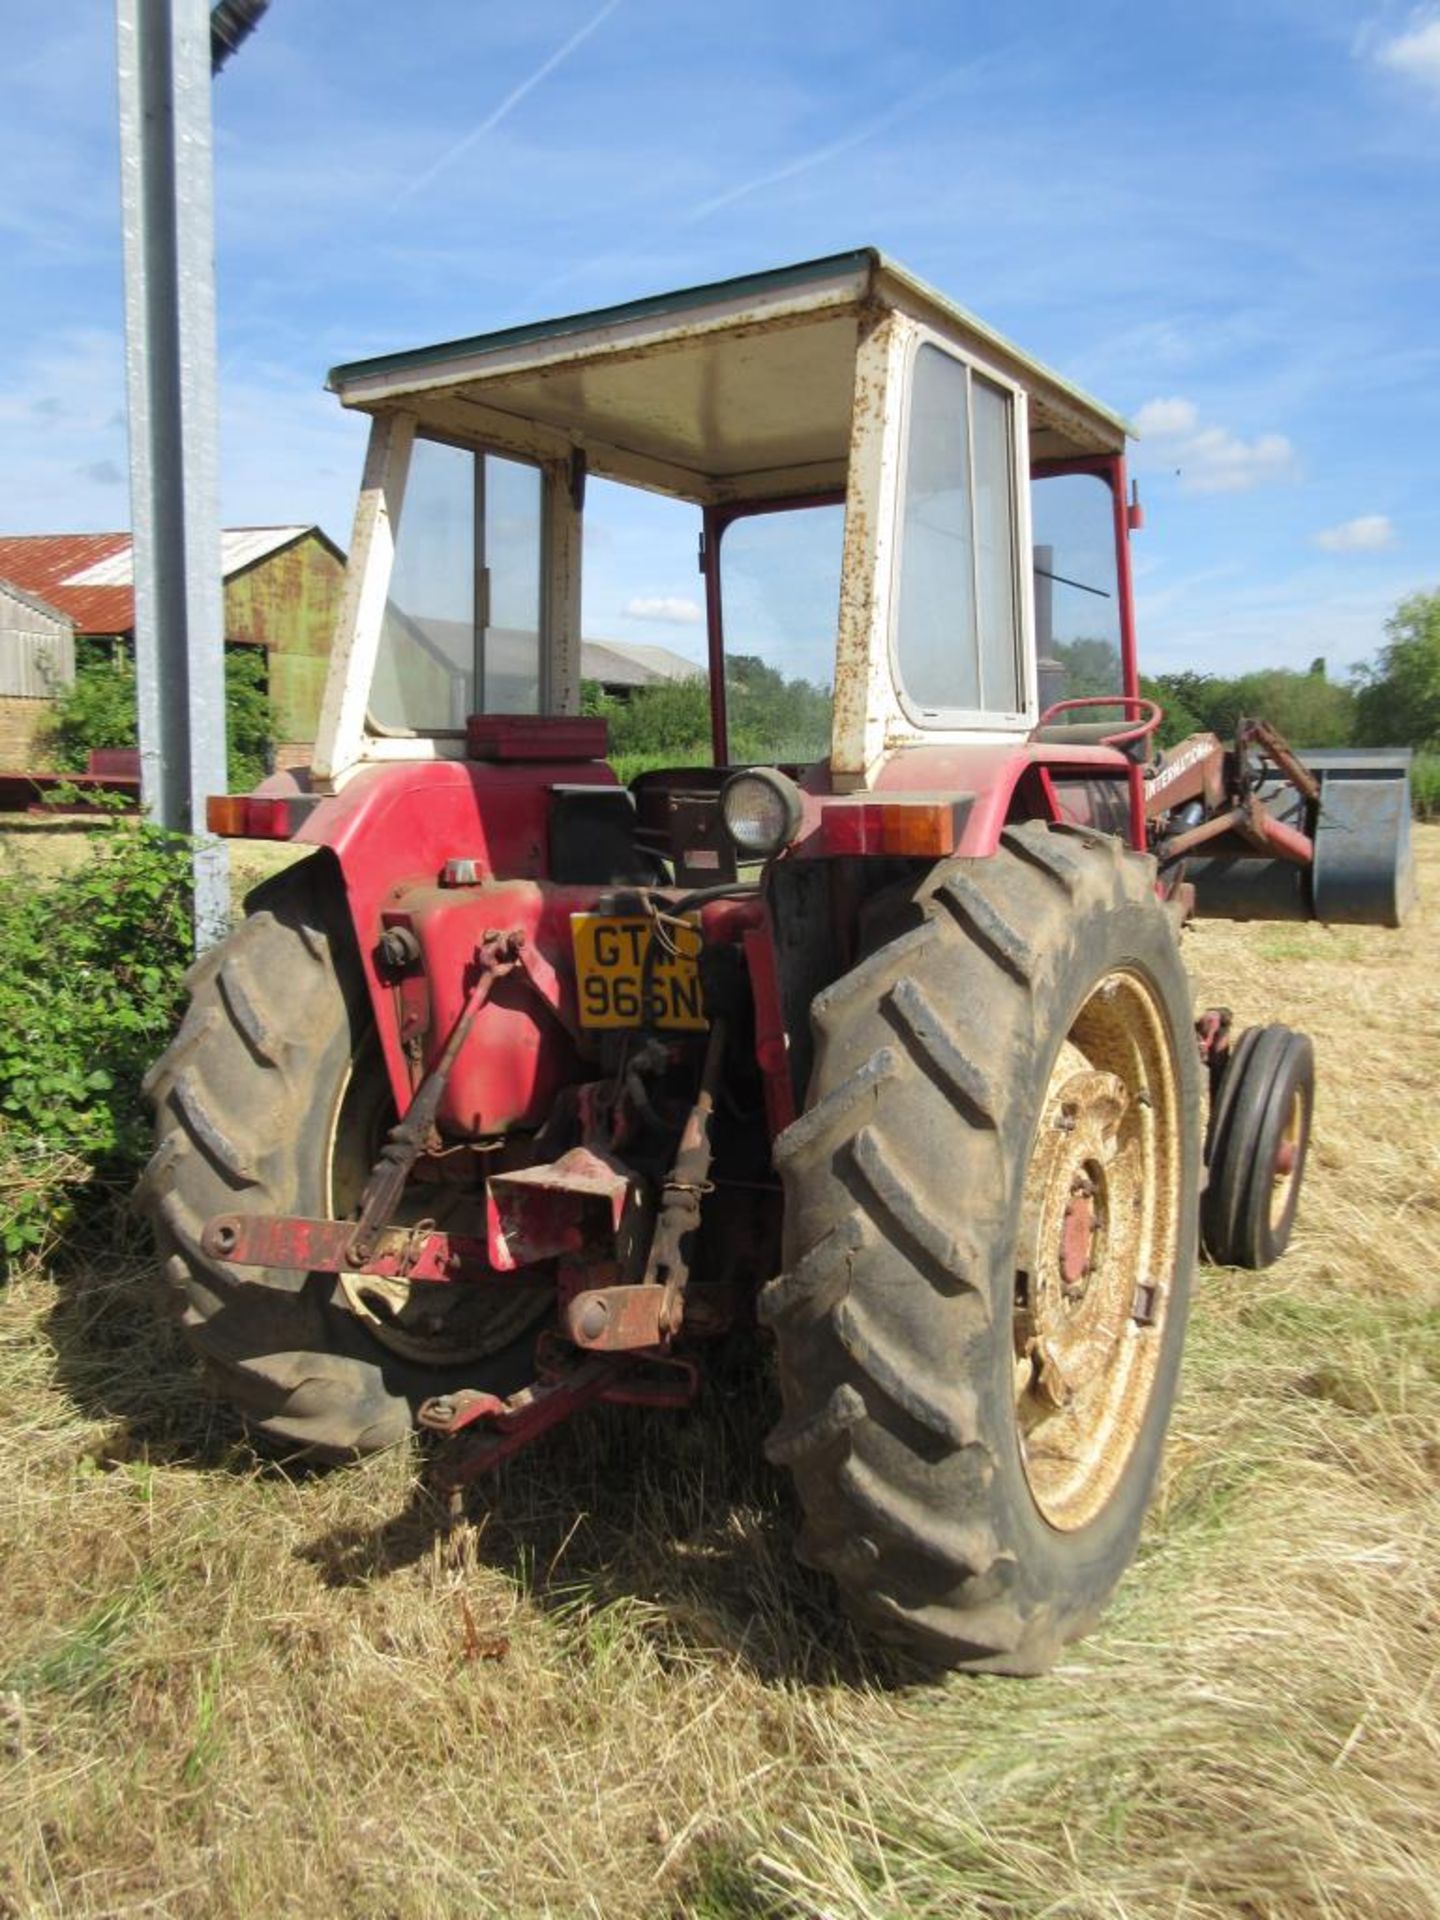 1975 INTERNATIONAL 574 2wd TRACTOR Fitted with IH front loader and bucket, cab, rear linkage, - Image 3 of 5